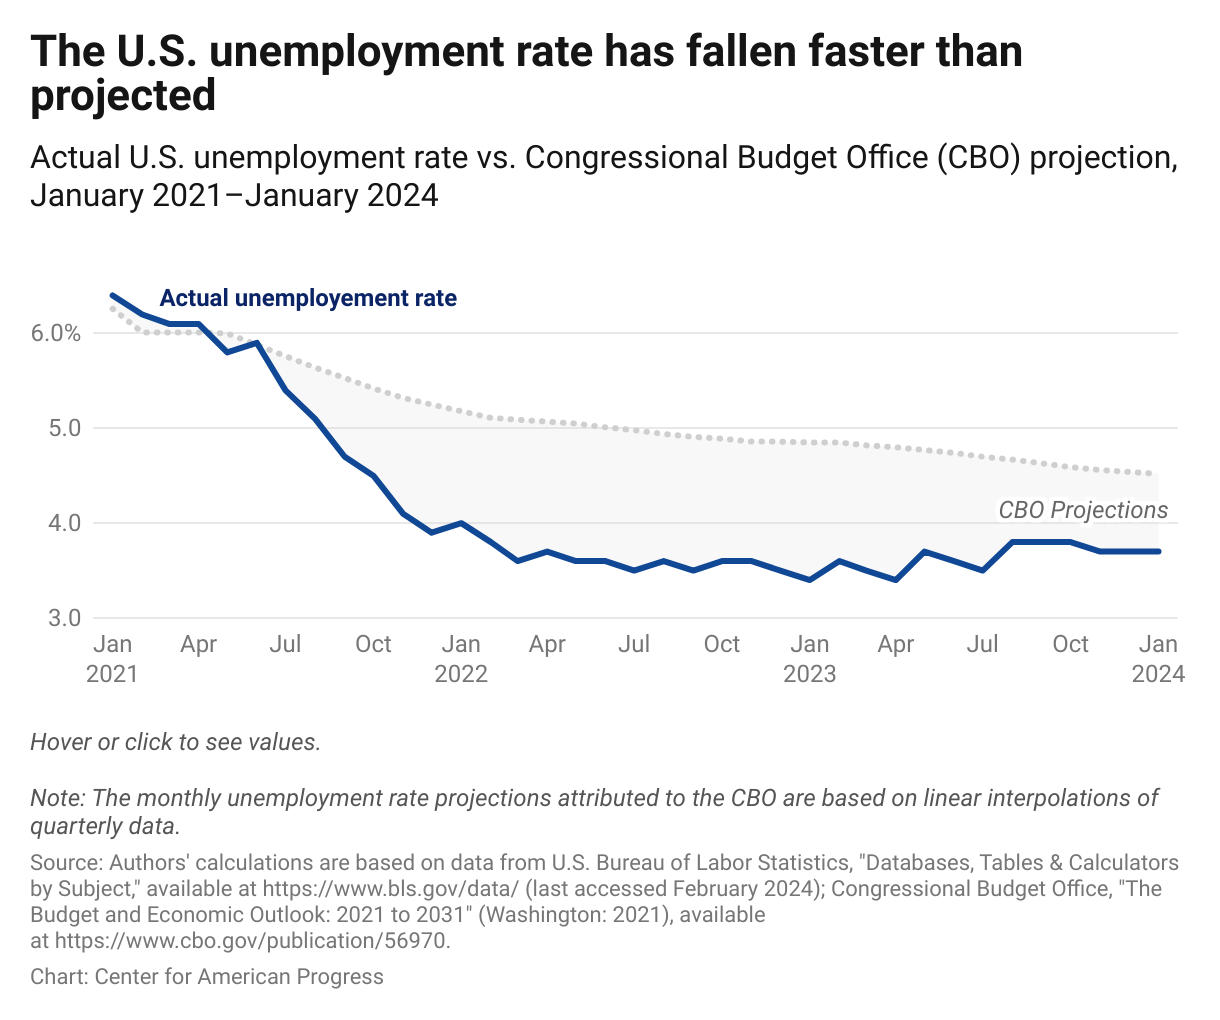 A line graph showing that the actual unemployment rate has fallen significantly faster than originally forecasted by the CBO, with actual unemployment at 3.7 percent in January 2024 compared with the 4.5 percent forecast.